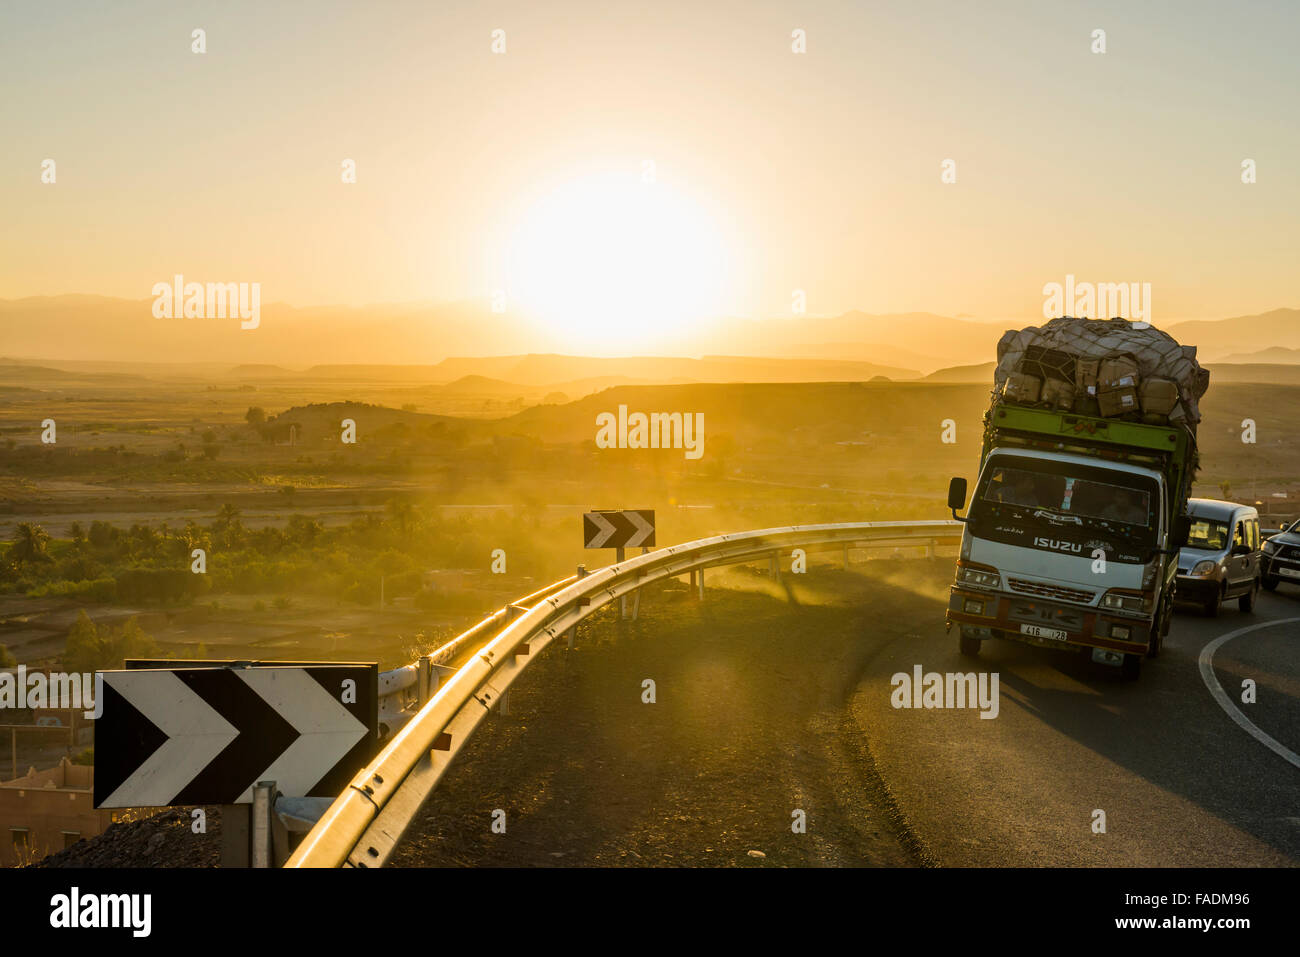 Loaded truck on curvy road in Dades Valley at sunset, Ouarzazate, Morocco Stock Photo